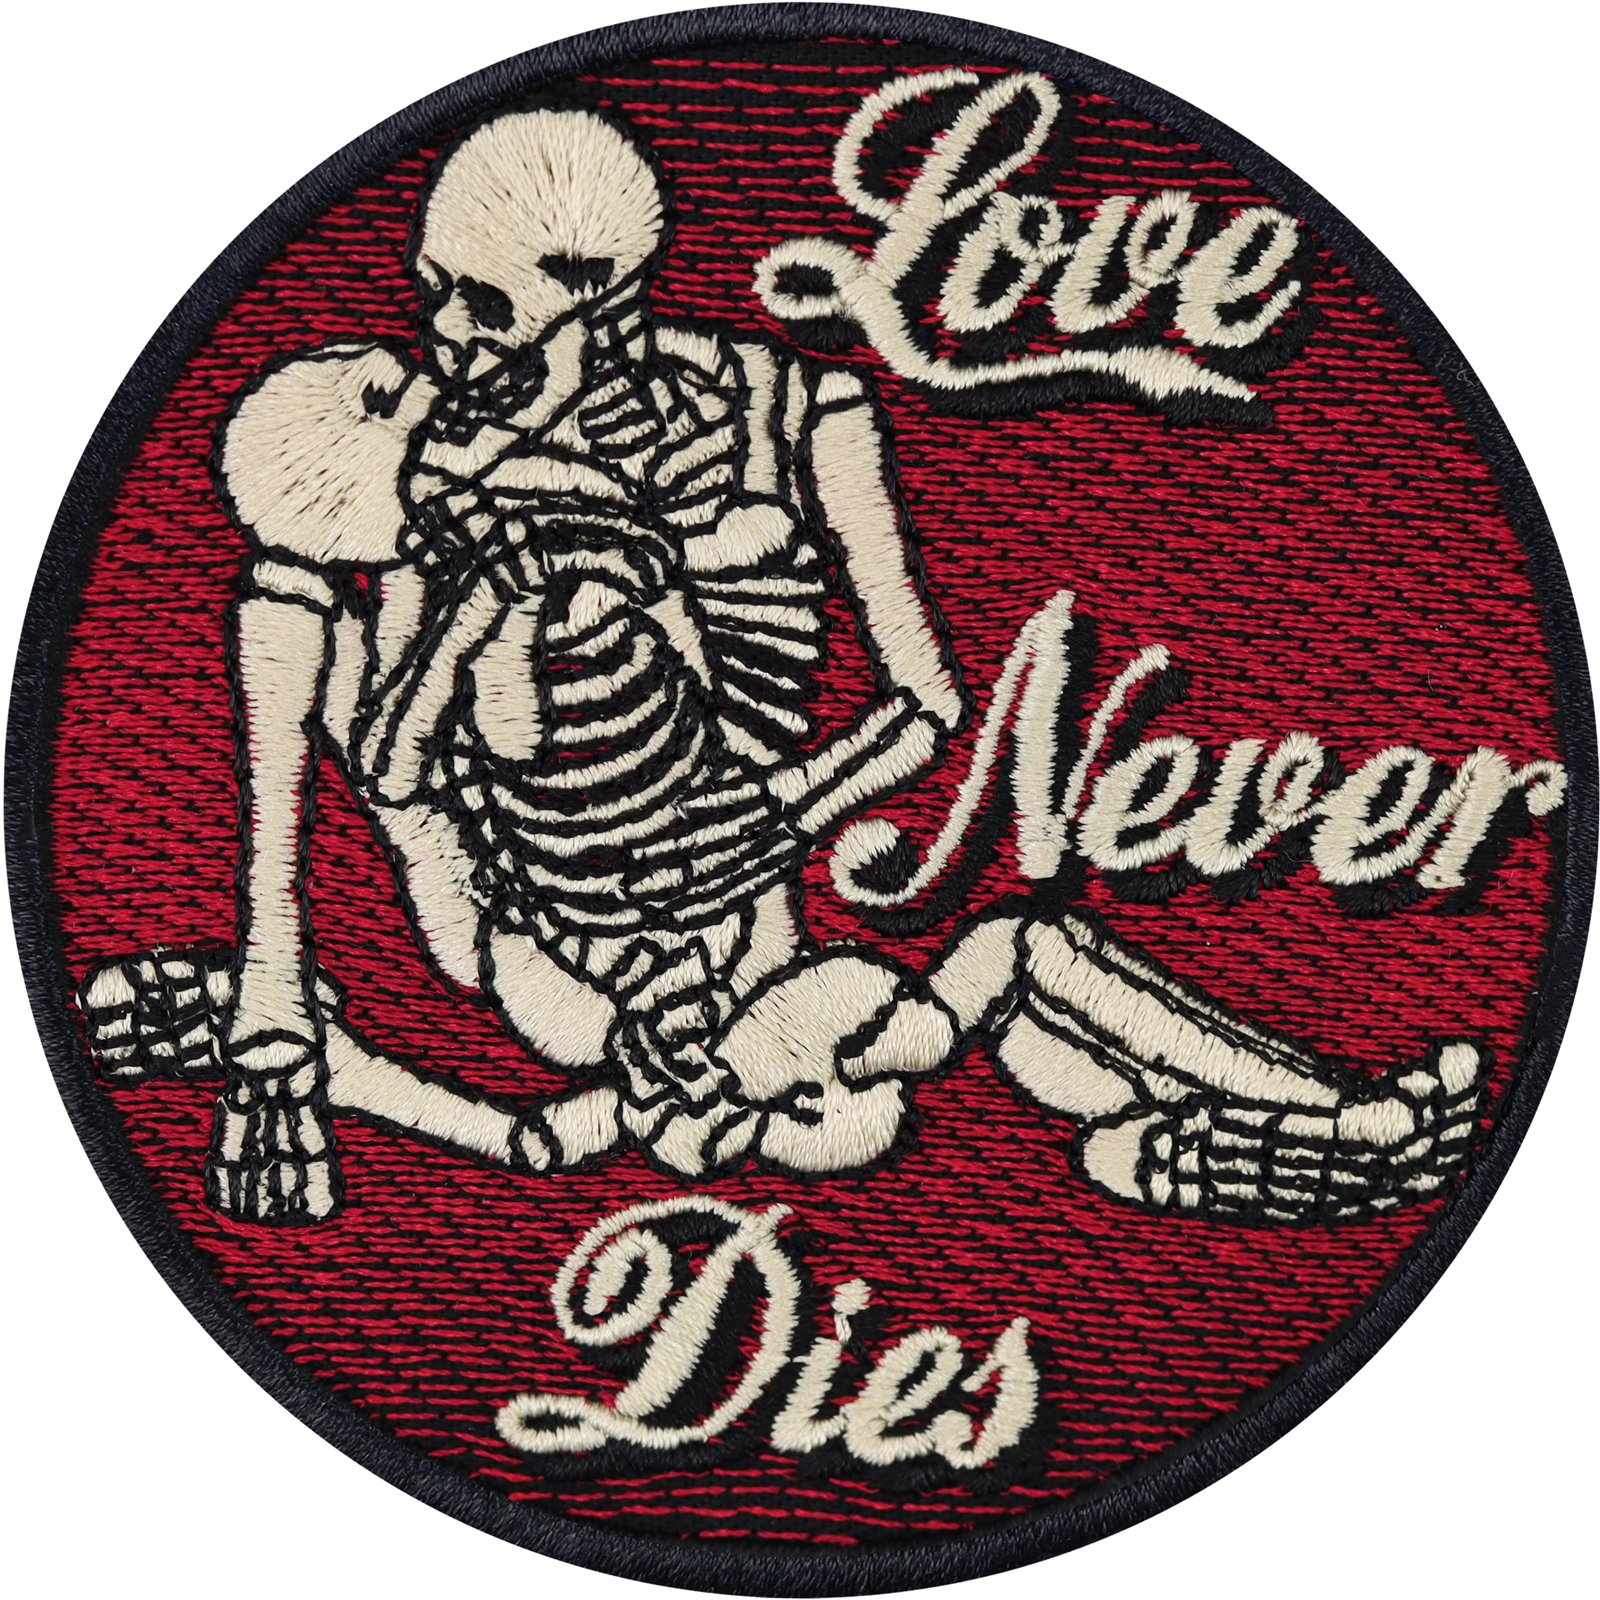 Love never dies - Patch